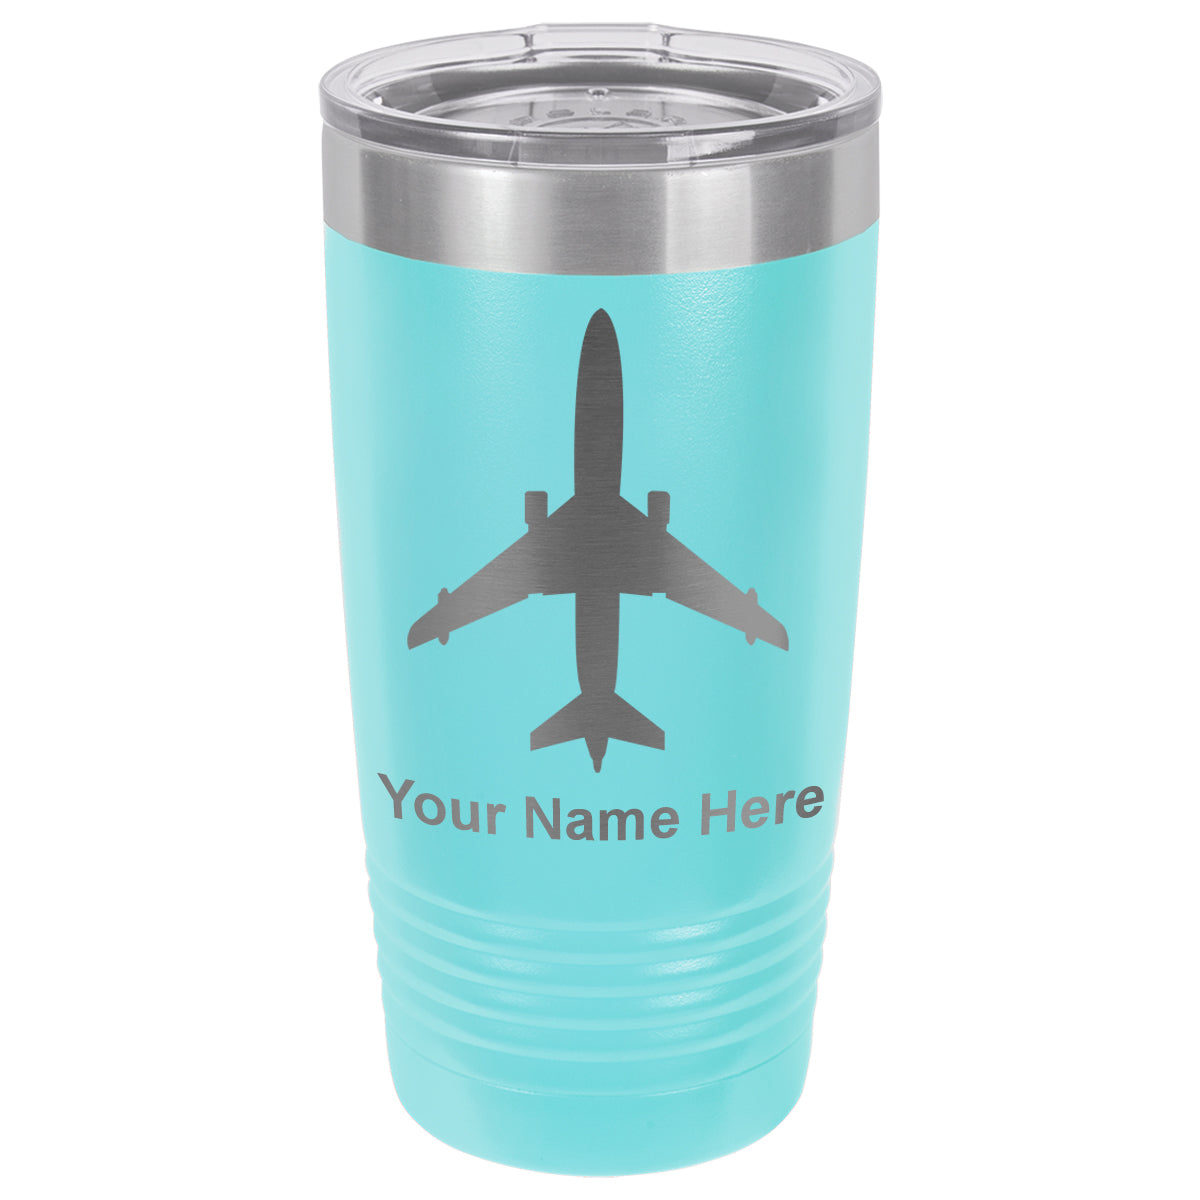 20oz Vacuum Insulated Tumbler Mug, Jet Airplane, Personalized Engraving Included